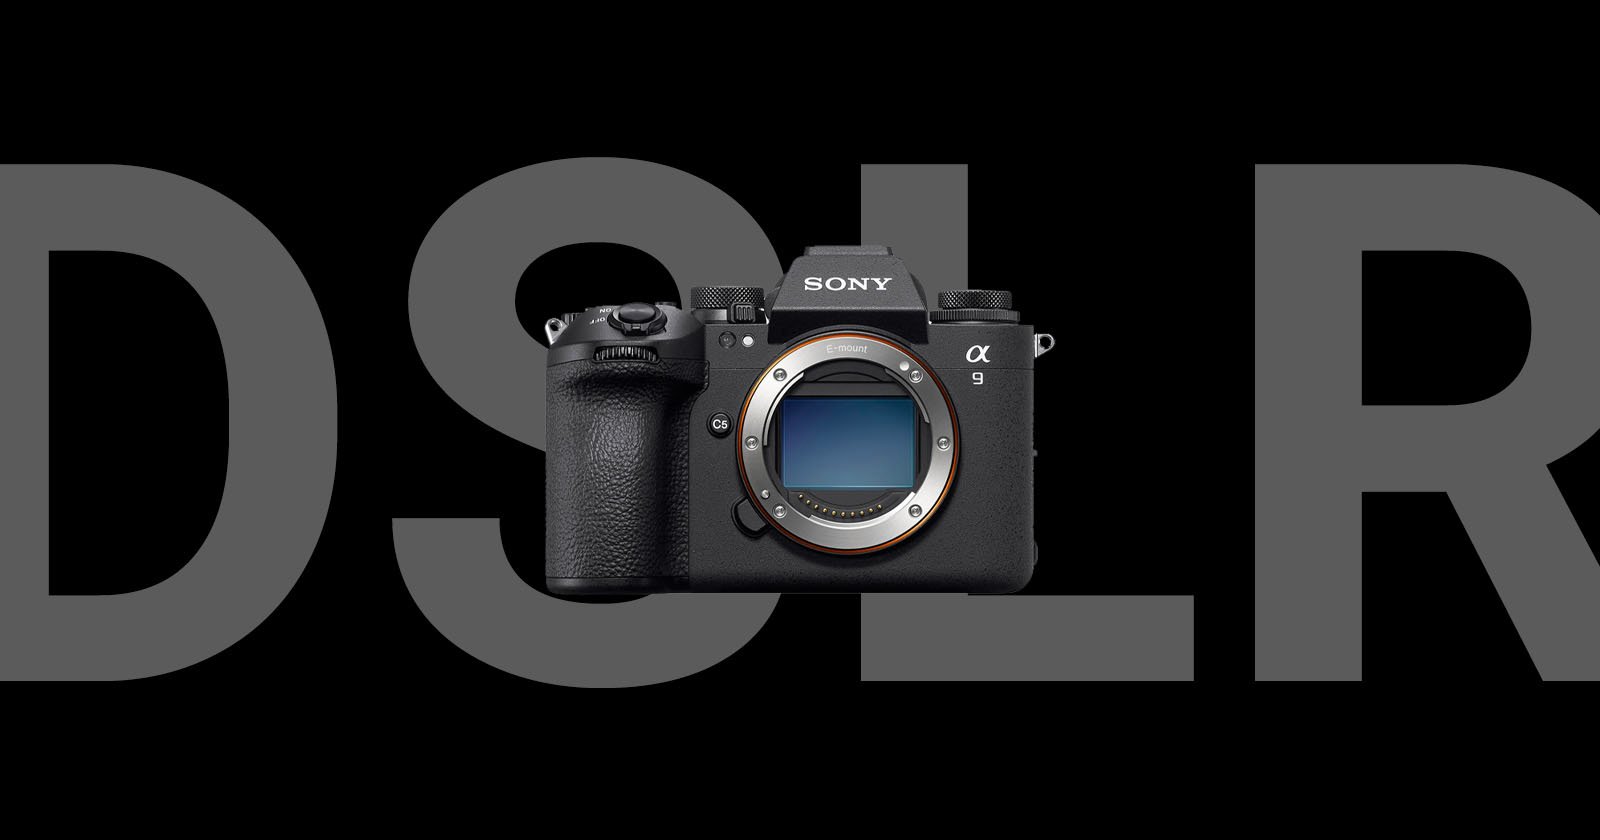 A sony alpha a9 mirrorless camera without a lens, displayed against a black background with the letters "dslr" in gray.